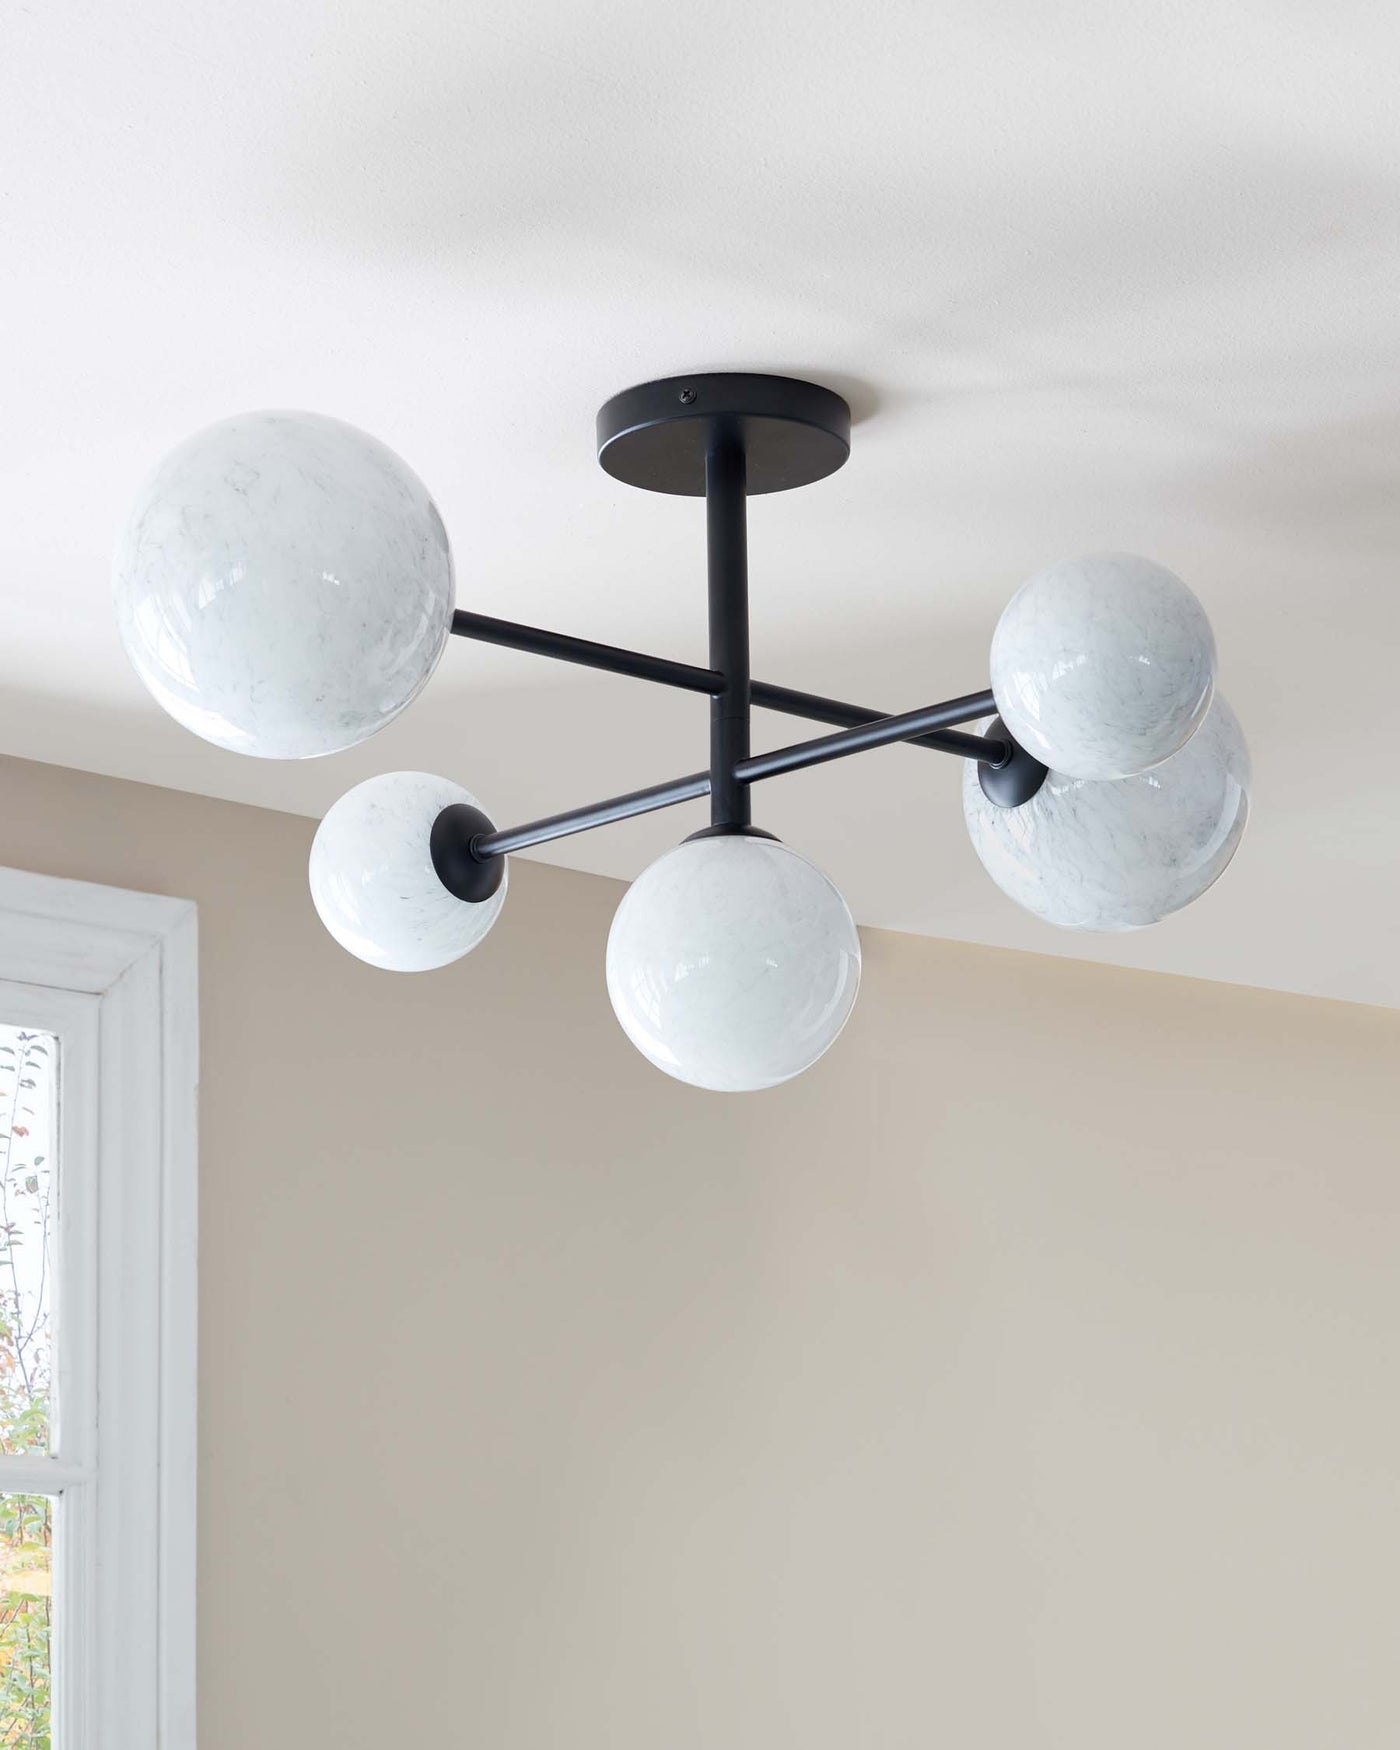 A modern-style chandelier with a matte black finish and five spherical, marbled glass shades affixed to linear arms, radiating from a central point in a semi-flush mount design.